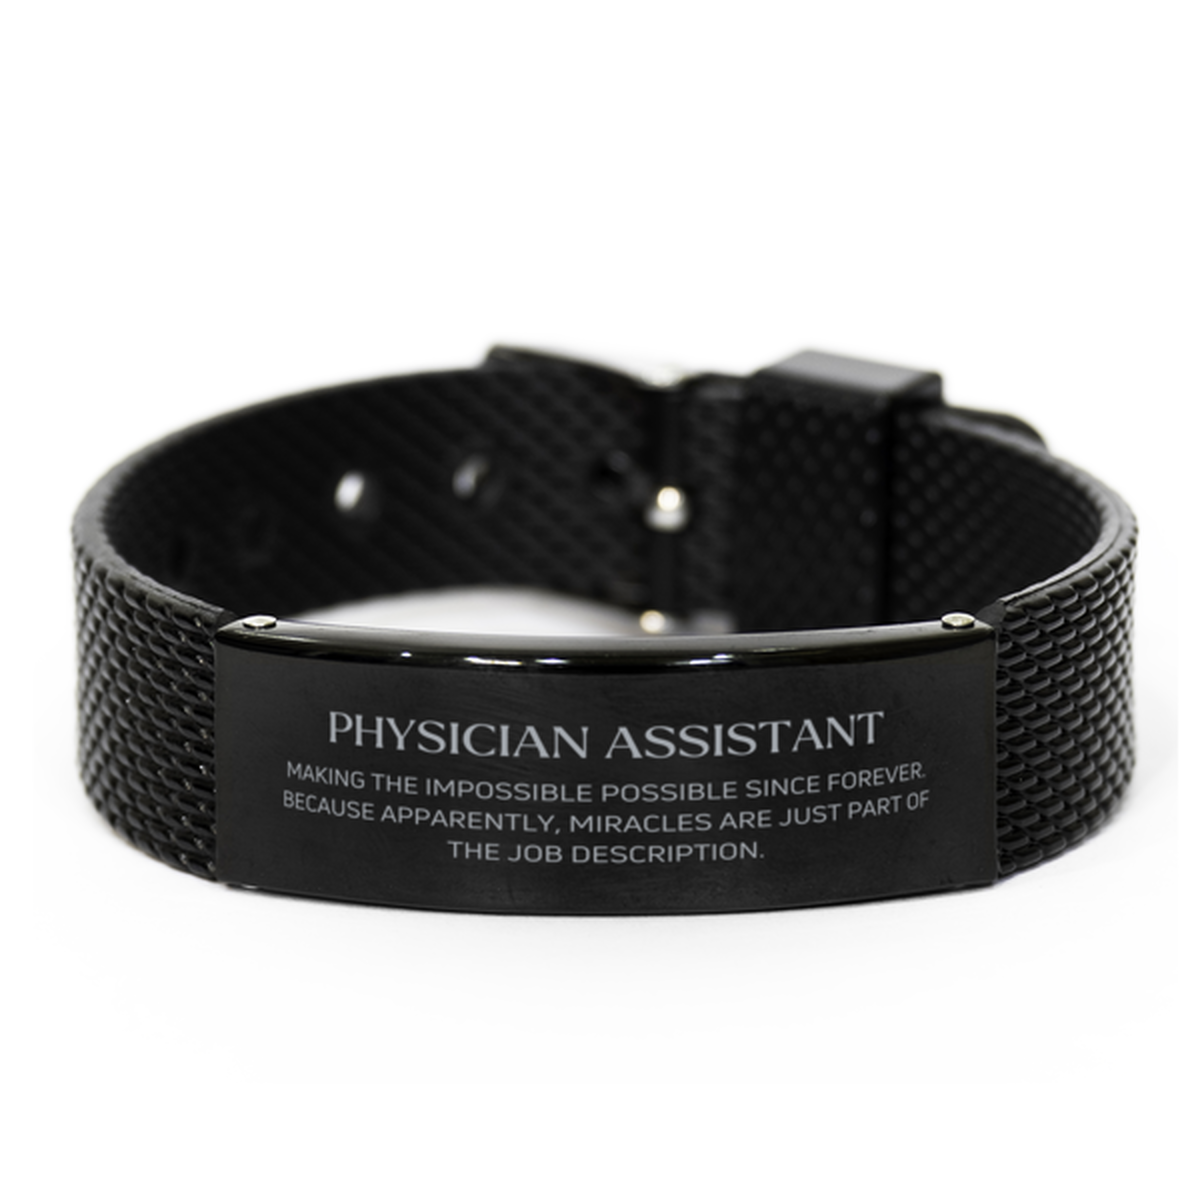 Funny Physician Assistant Gifts, Miracles are just part of the job description, Inspirational Birthday Black Shark Mesh Bracelet For Physician Assistant, Men, Women, Coworkers, Friends, Boss